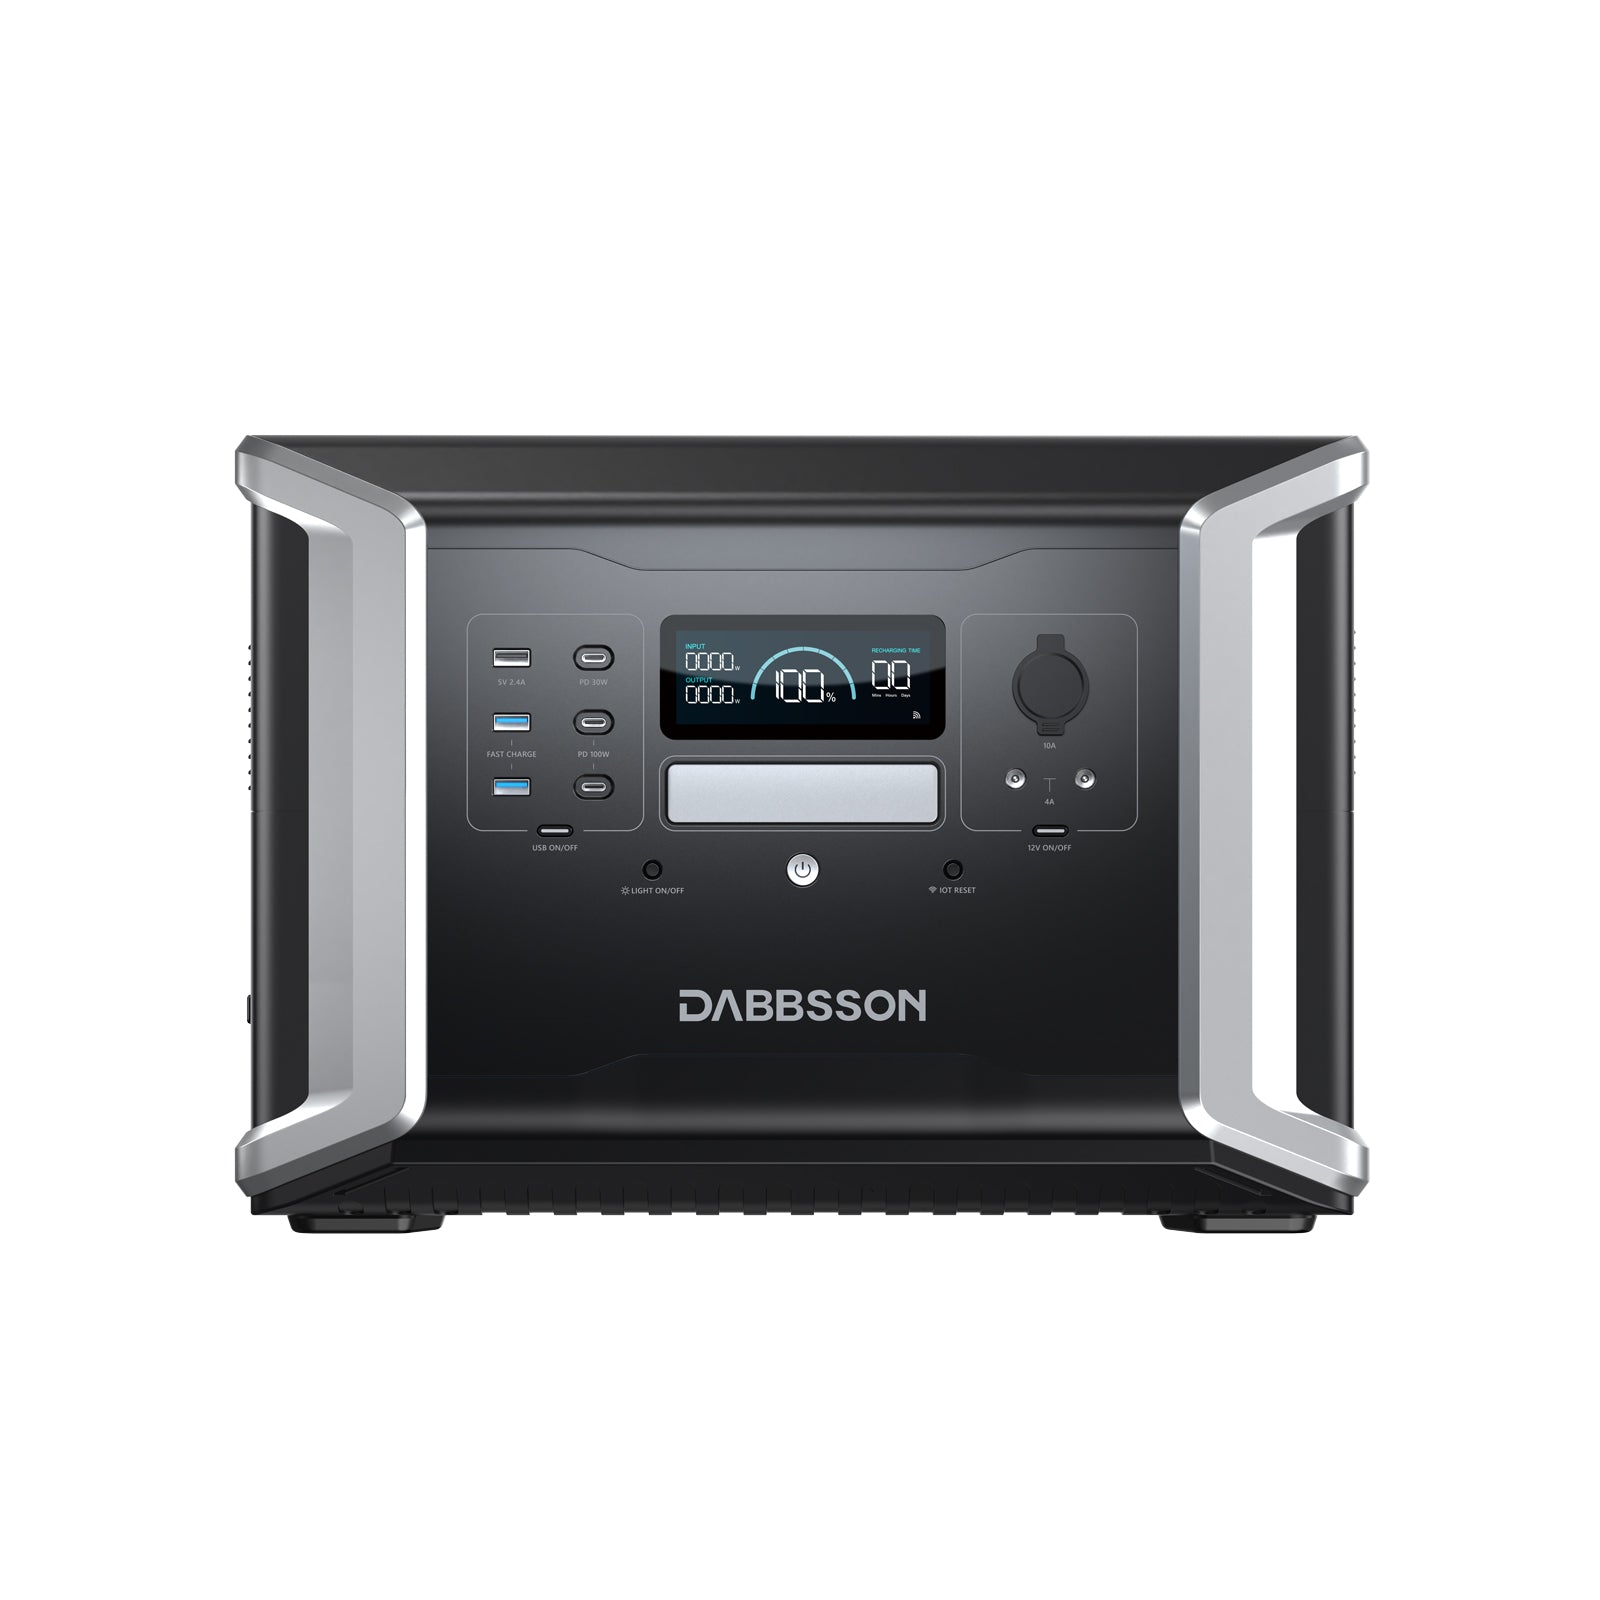 Dabbsson DBS1400 Pro Portable Power Station - 1382Wh | 2400W